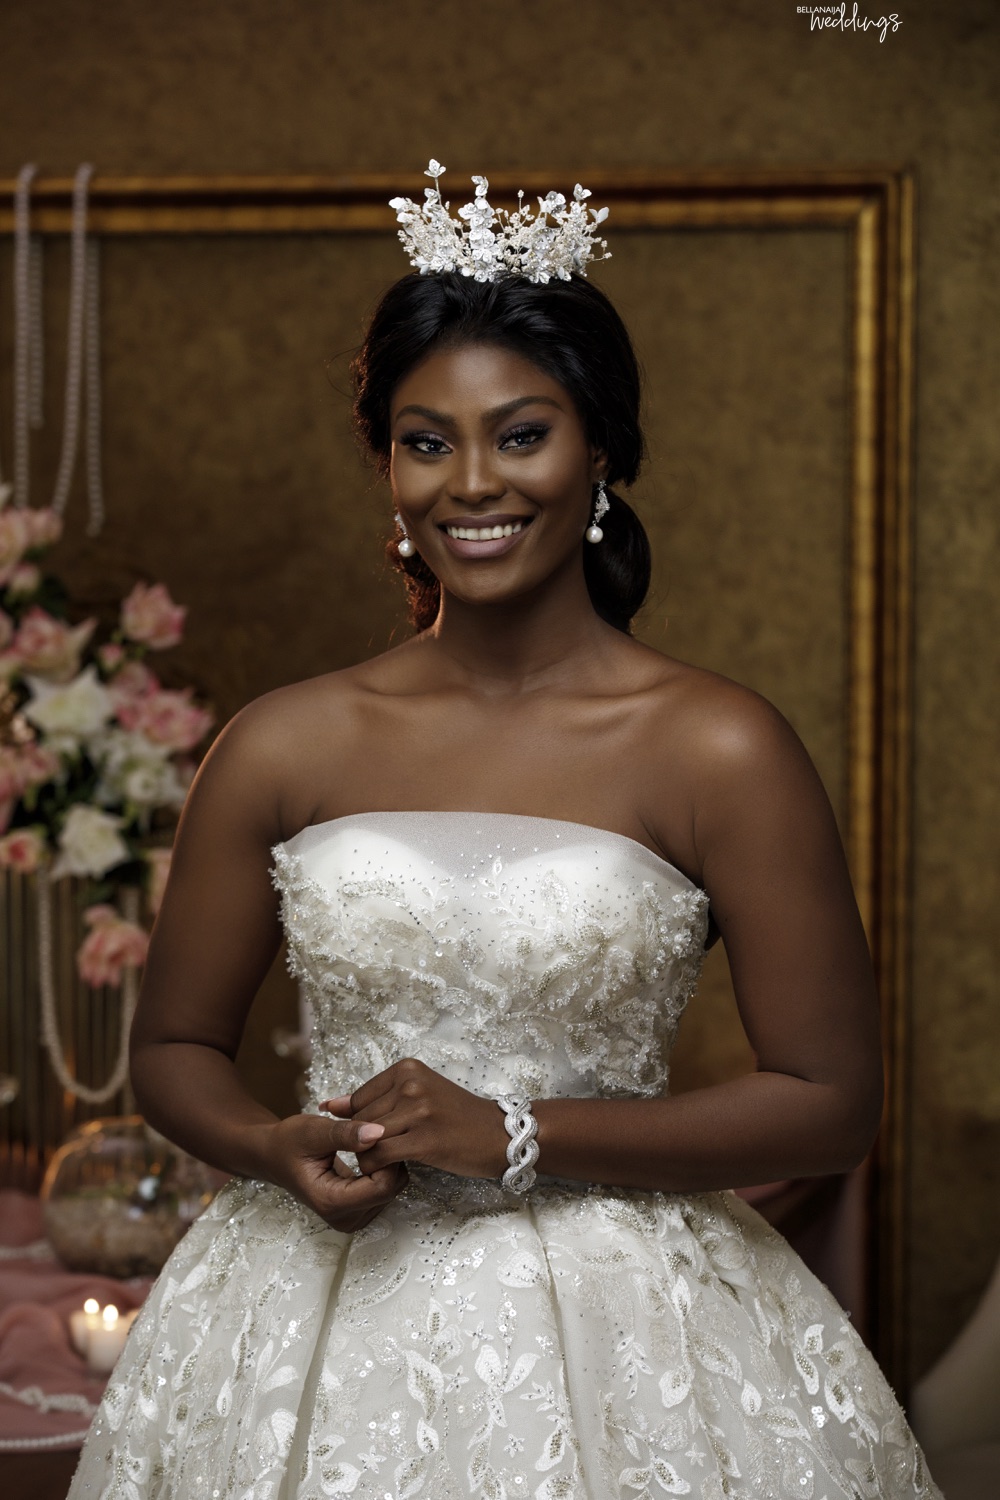 BN Bridal: The 2020 Classic Collection by Ophelia Crossland